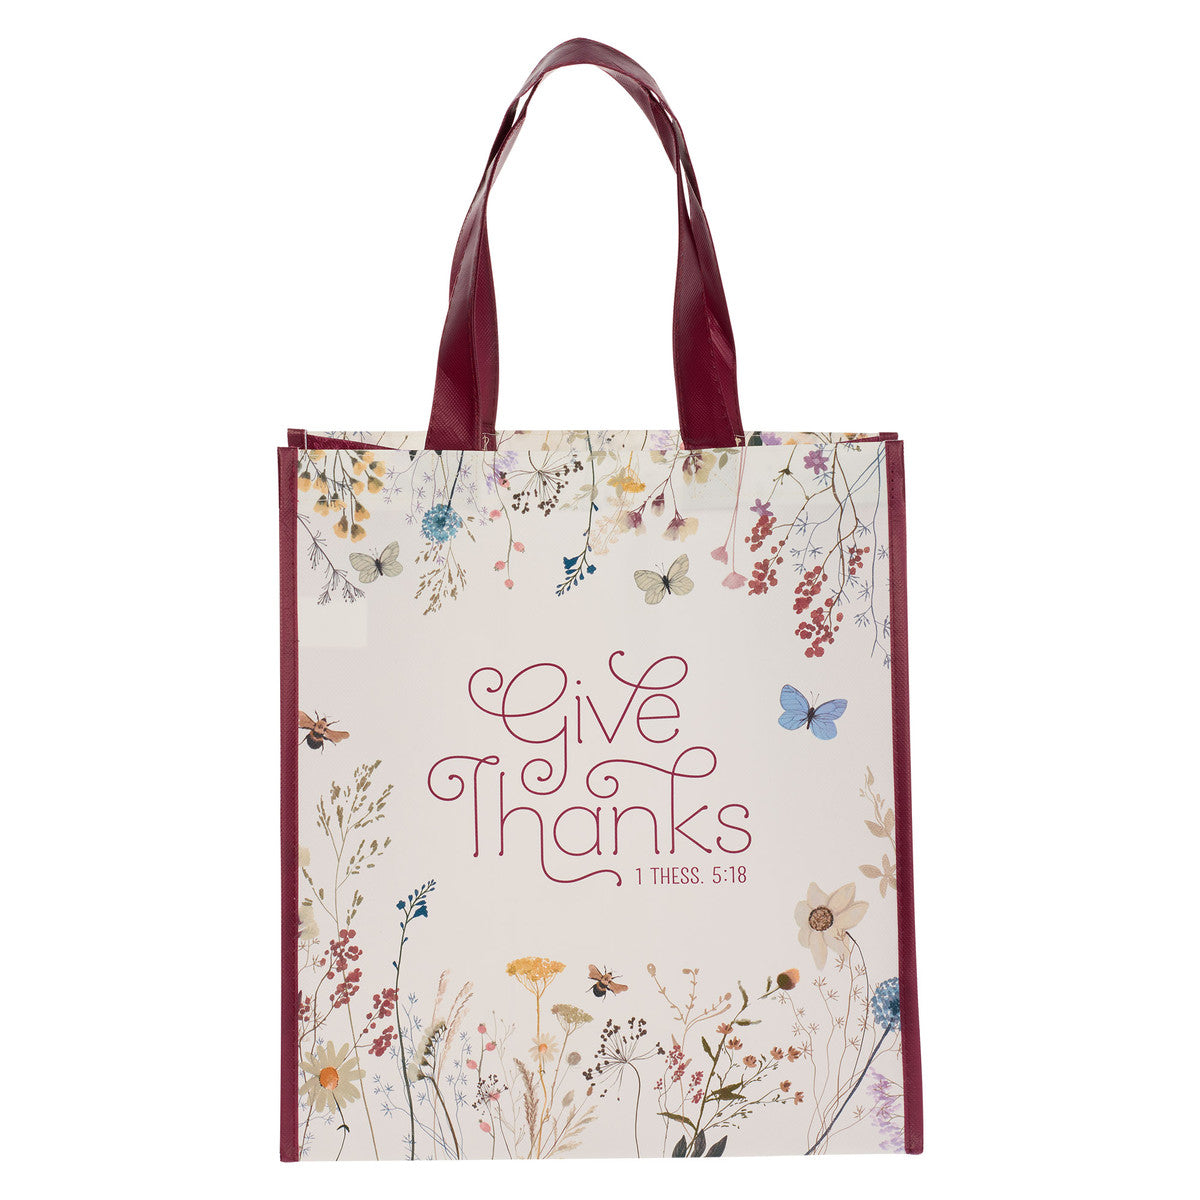 Give Thanks Topsy-Turvy Wildflower Non-Woven Coated Tote Bag - 1 Thessalonians 5:18 - The Christian Gift Company